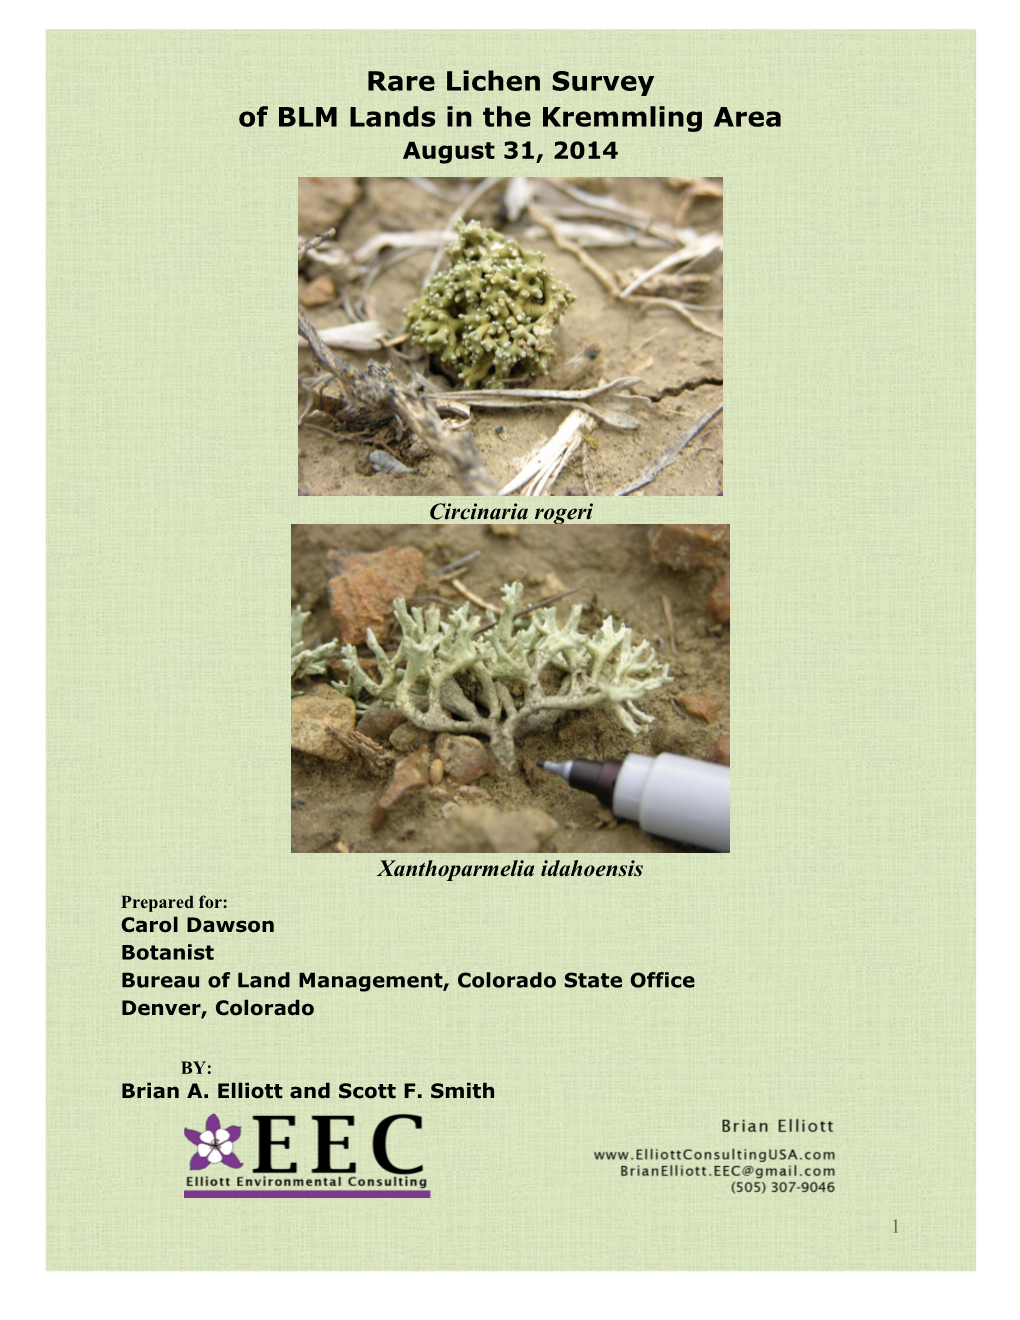 Rare Lichen Survey of BLM Lands in the Kremmling Area August 31, 2014